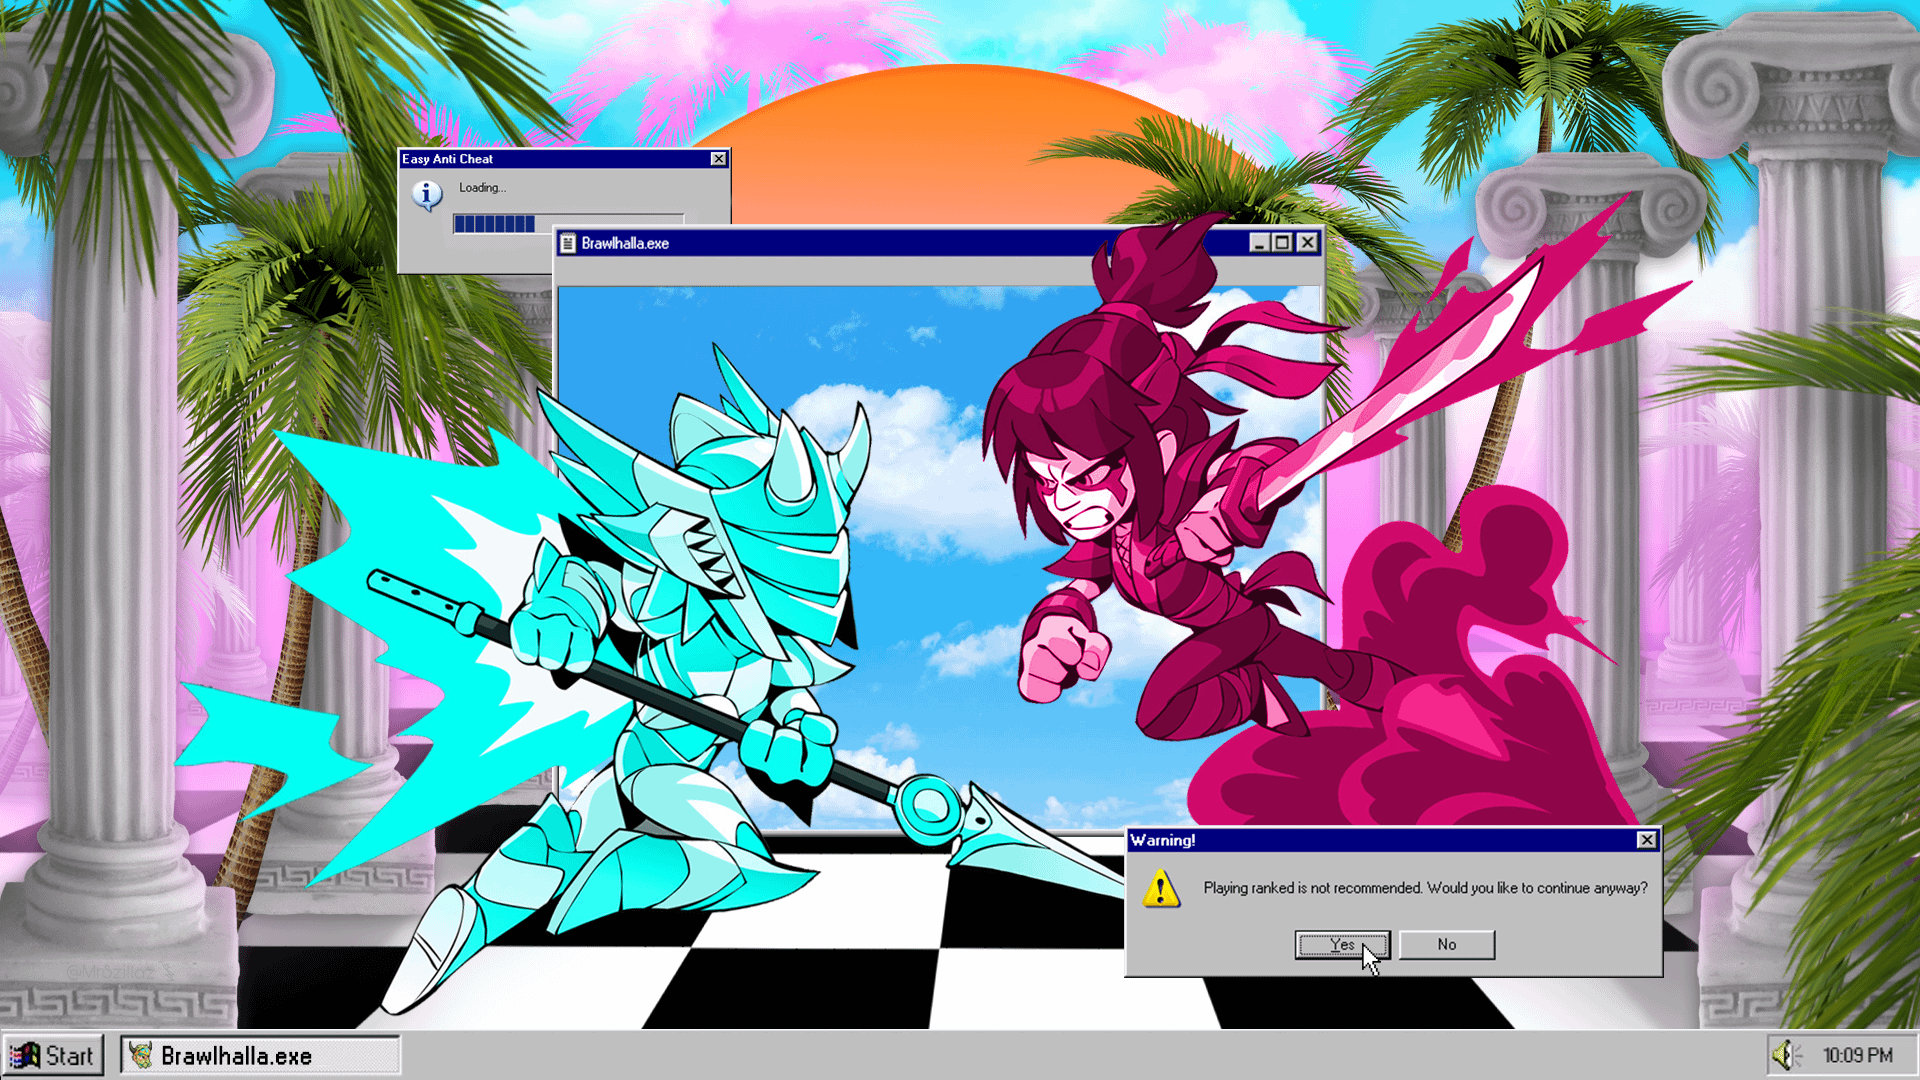 Made A Vaporwave Windows 95 Aesthetic Brawlhalla Wallpaper! Feel Free To Use